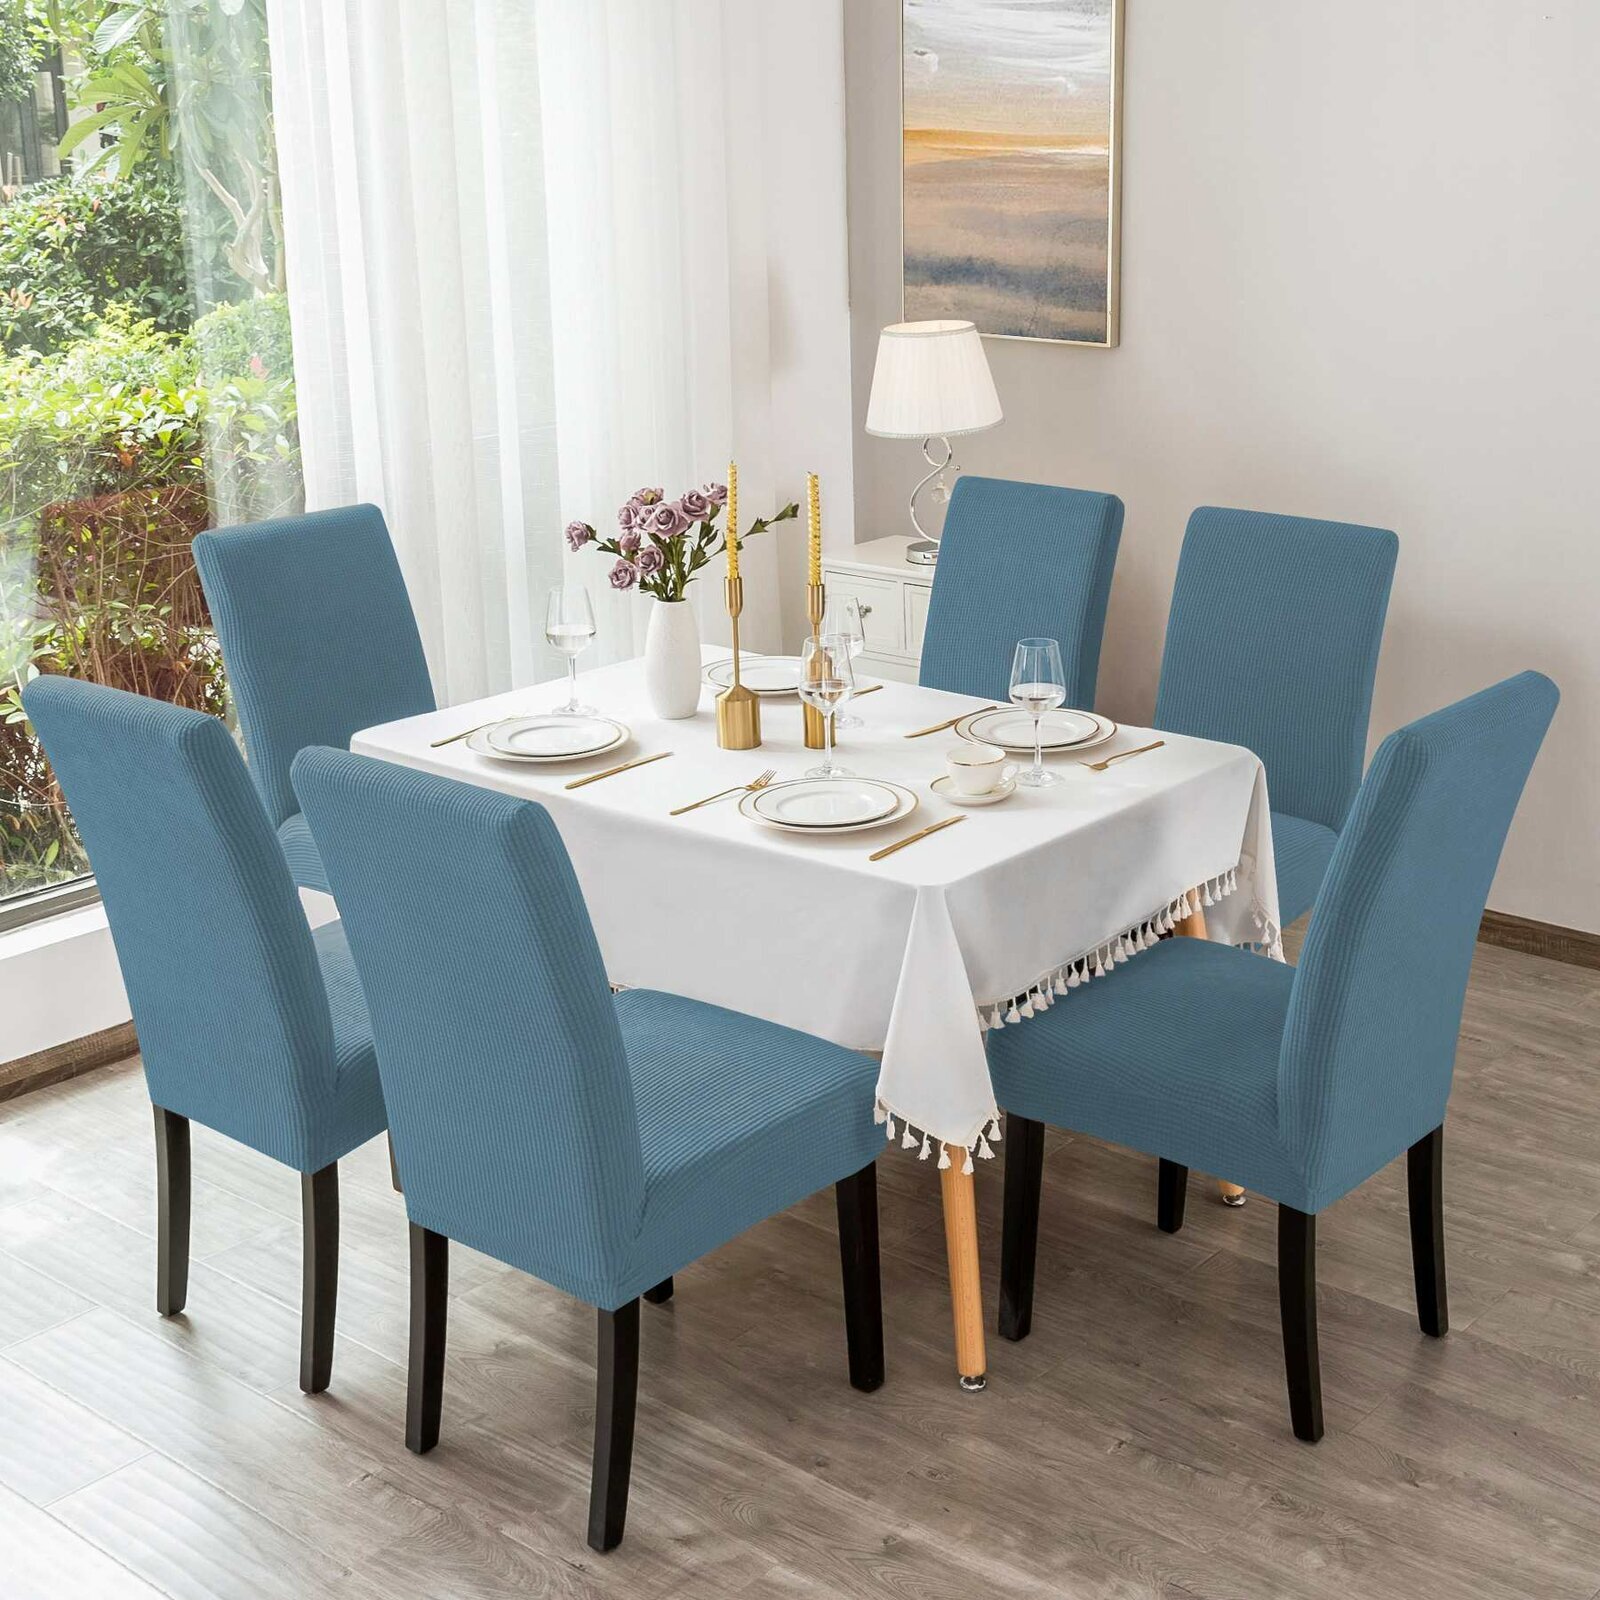 Modern dining chair slipcovers with a piped aesthetic